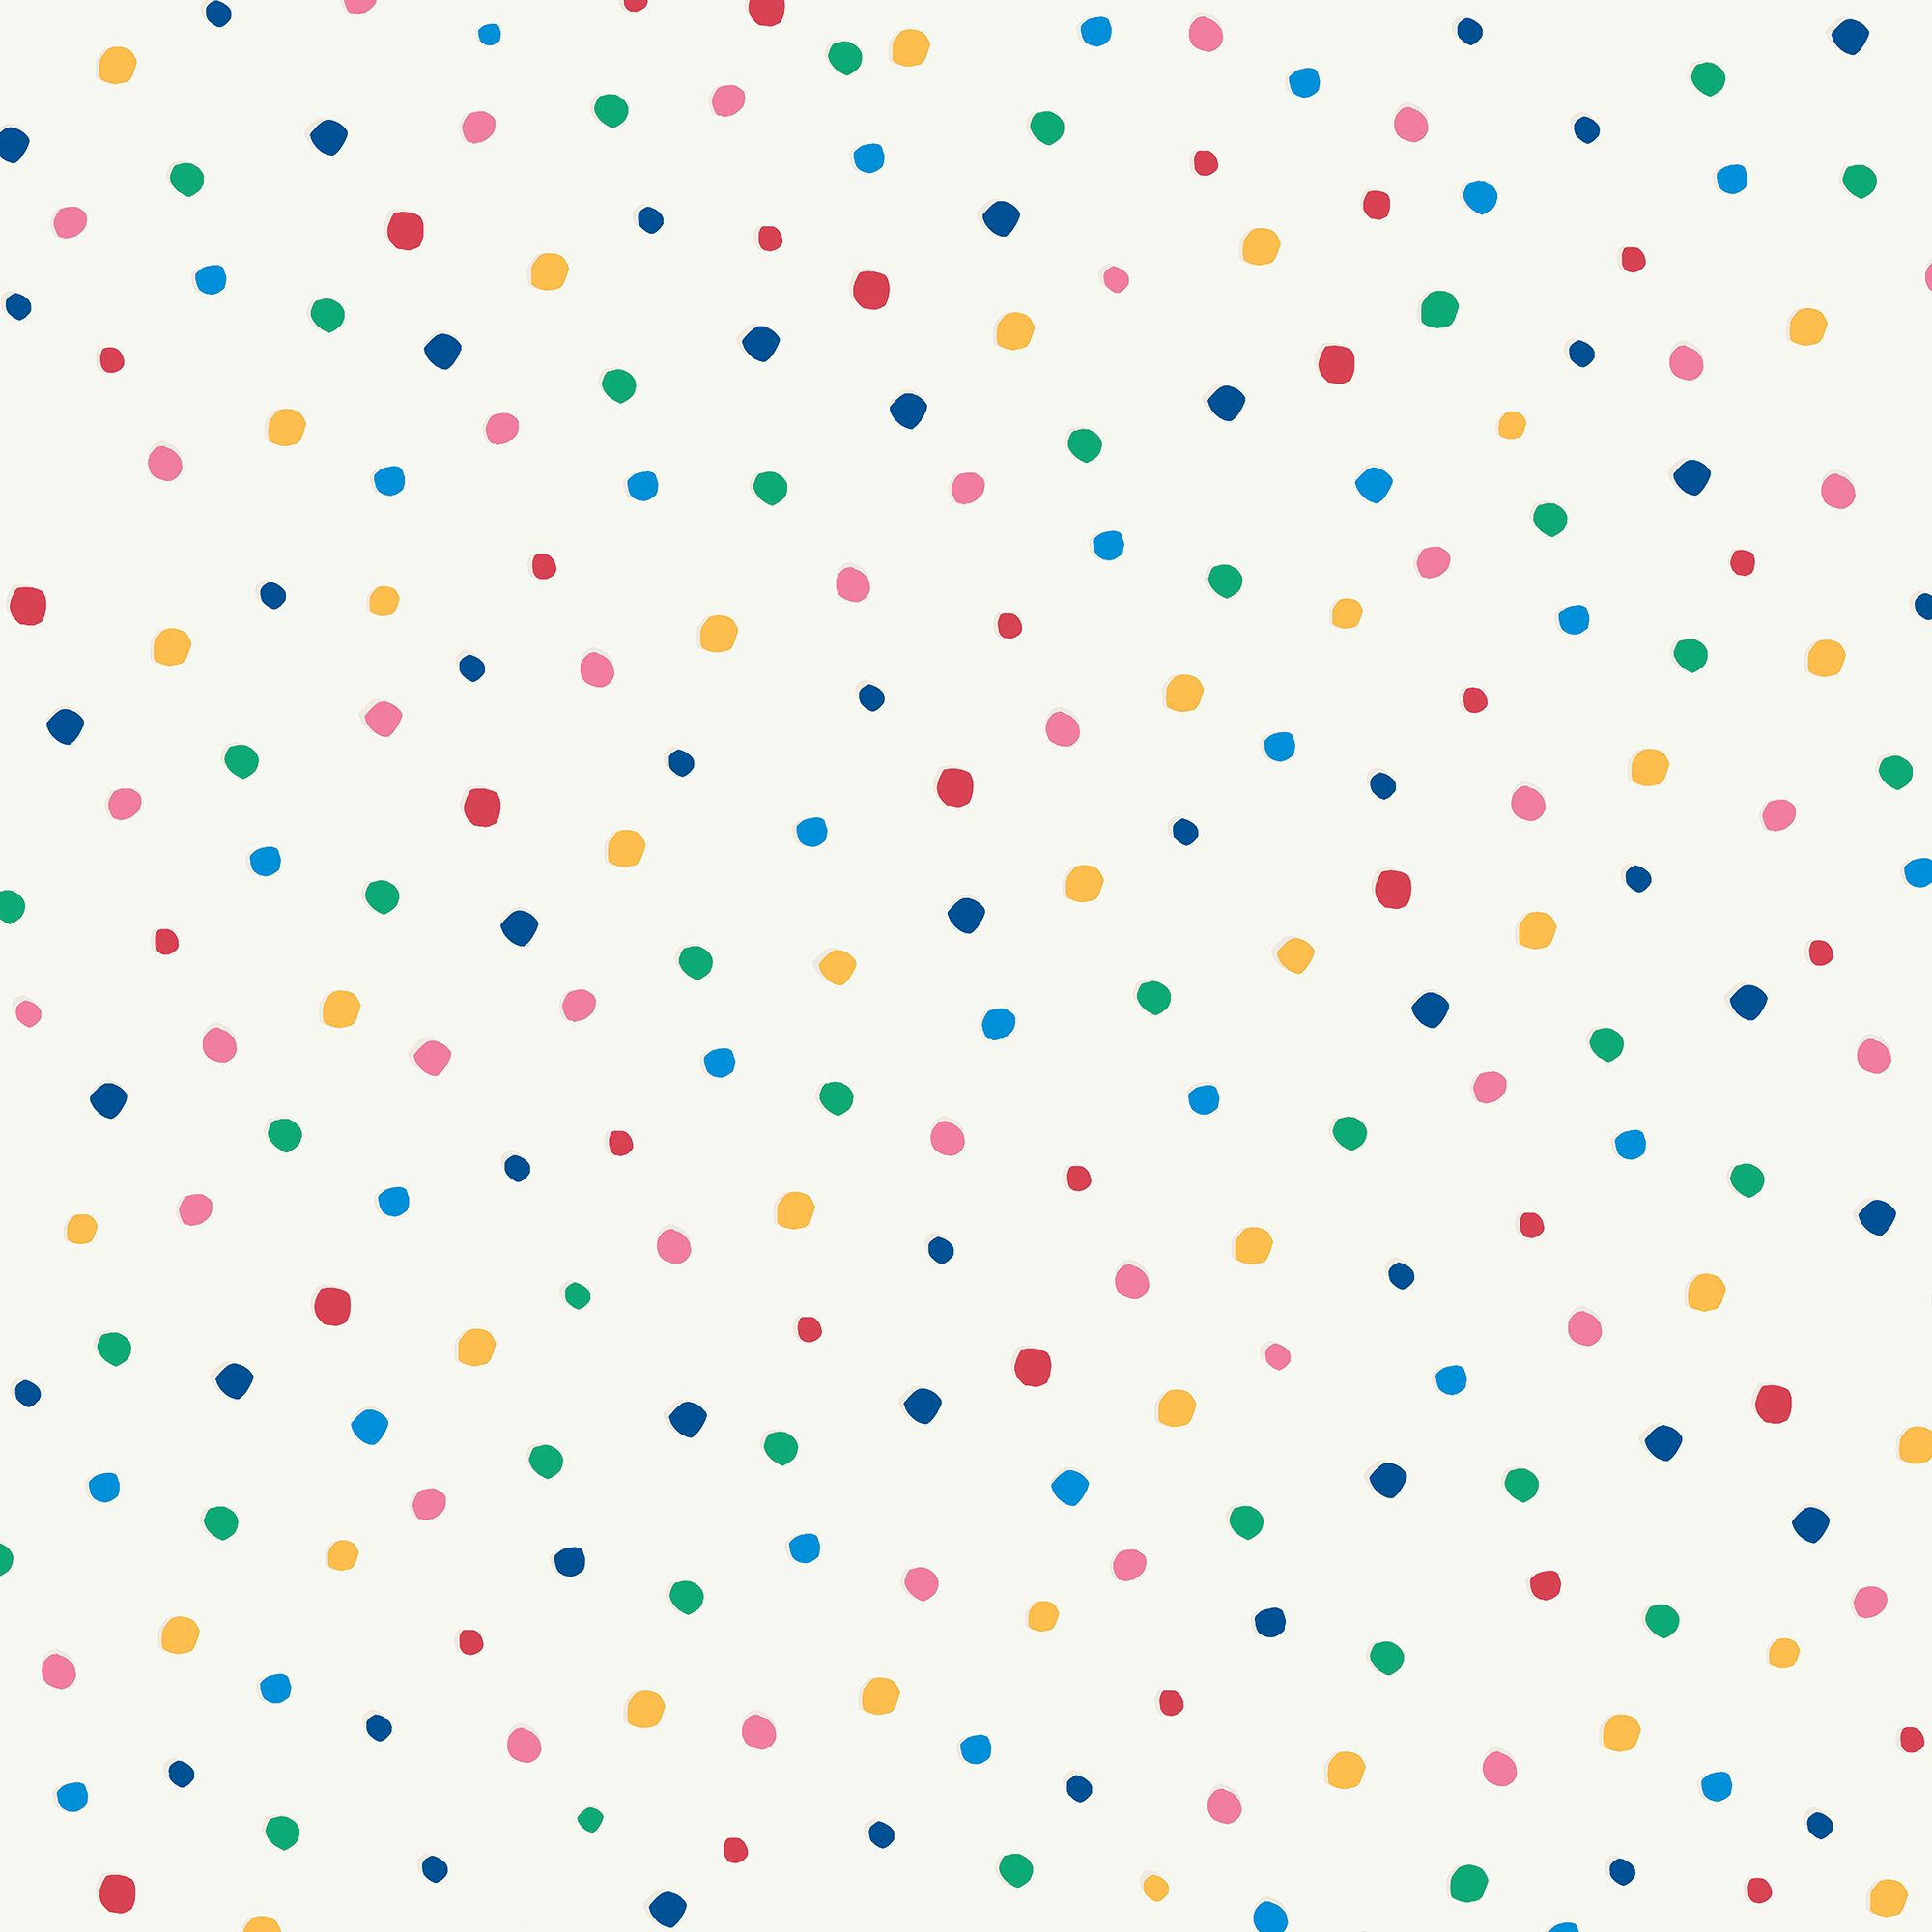 Joules Multicolour Spot Smooth Wallpaper Sample